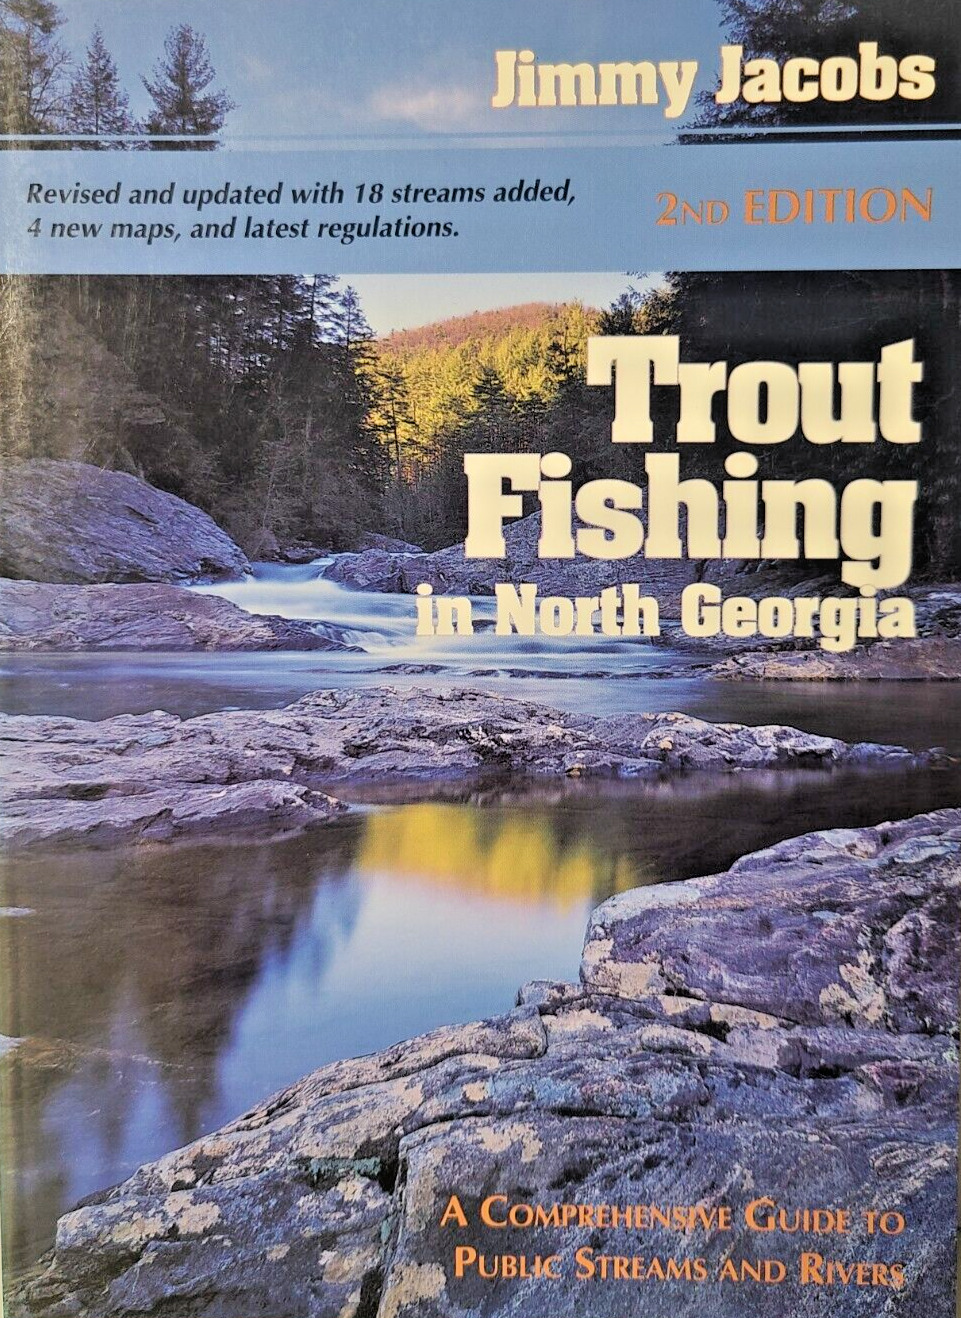 North Georgia Trout Fishing by Jimmy Jacobs